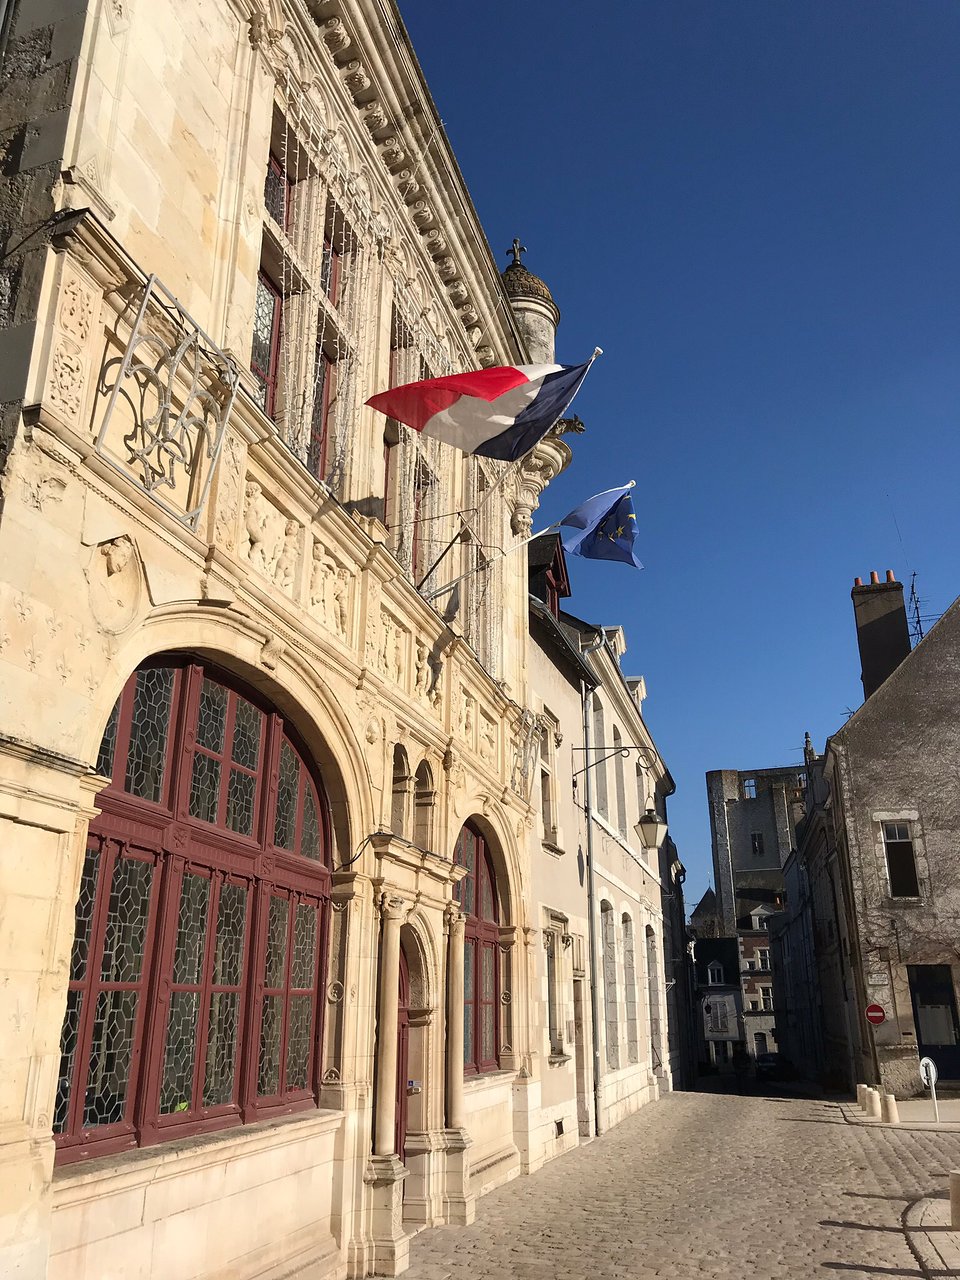 Les Jardin De sologne Best Of Hotel De Ville Beaugency 2020 All You Need to Know